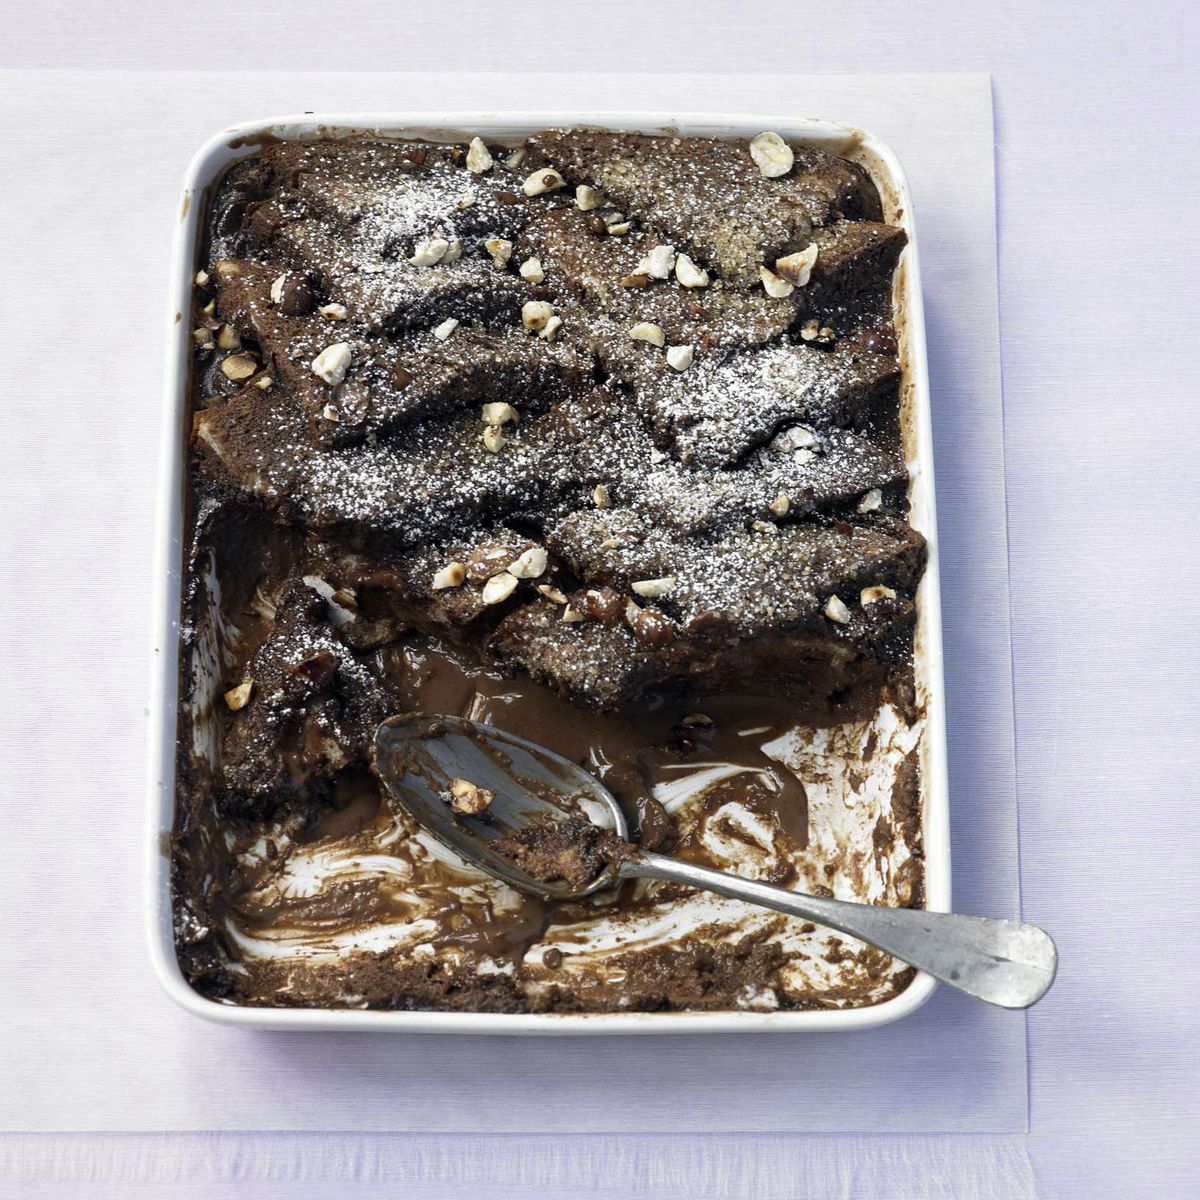 whisky bread and butter pudding with chocolate and toasted hazelnuts